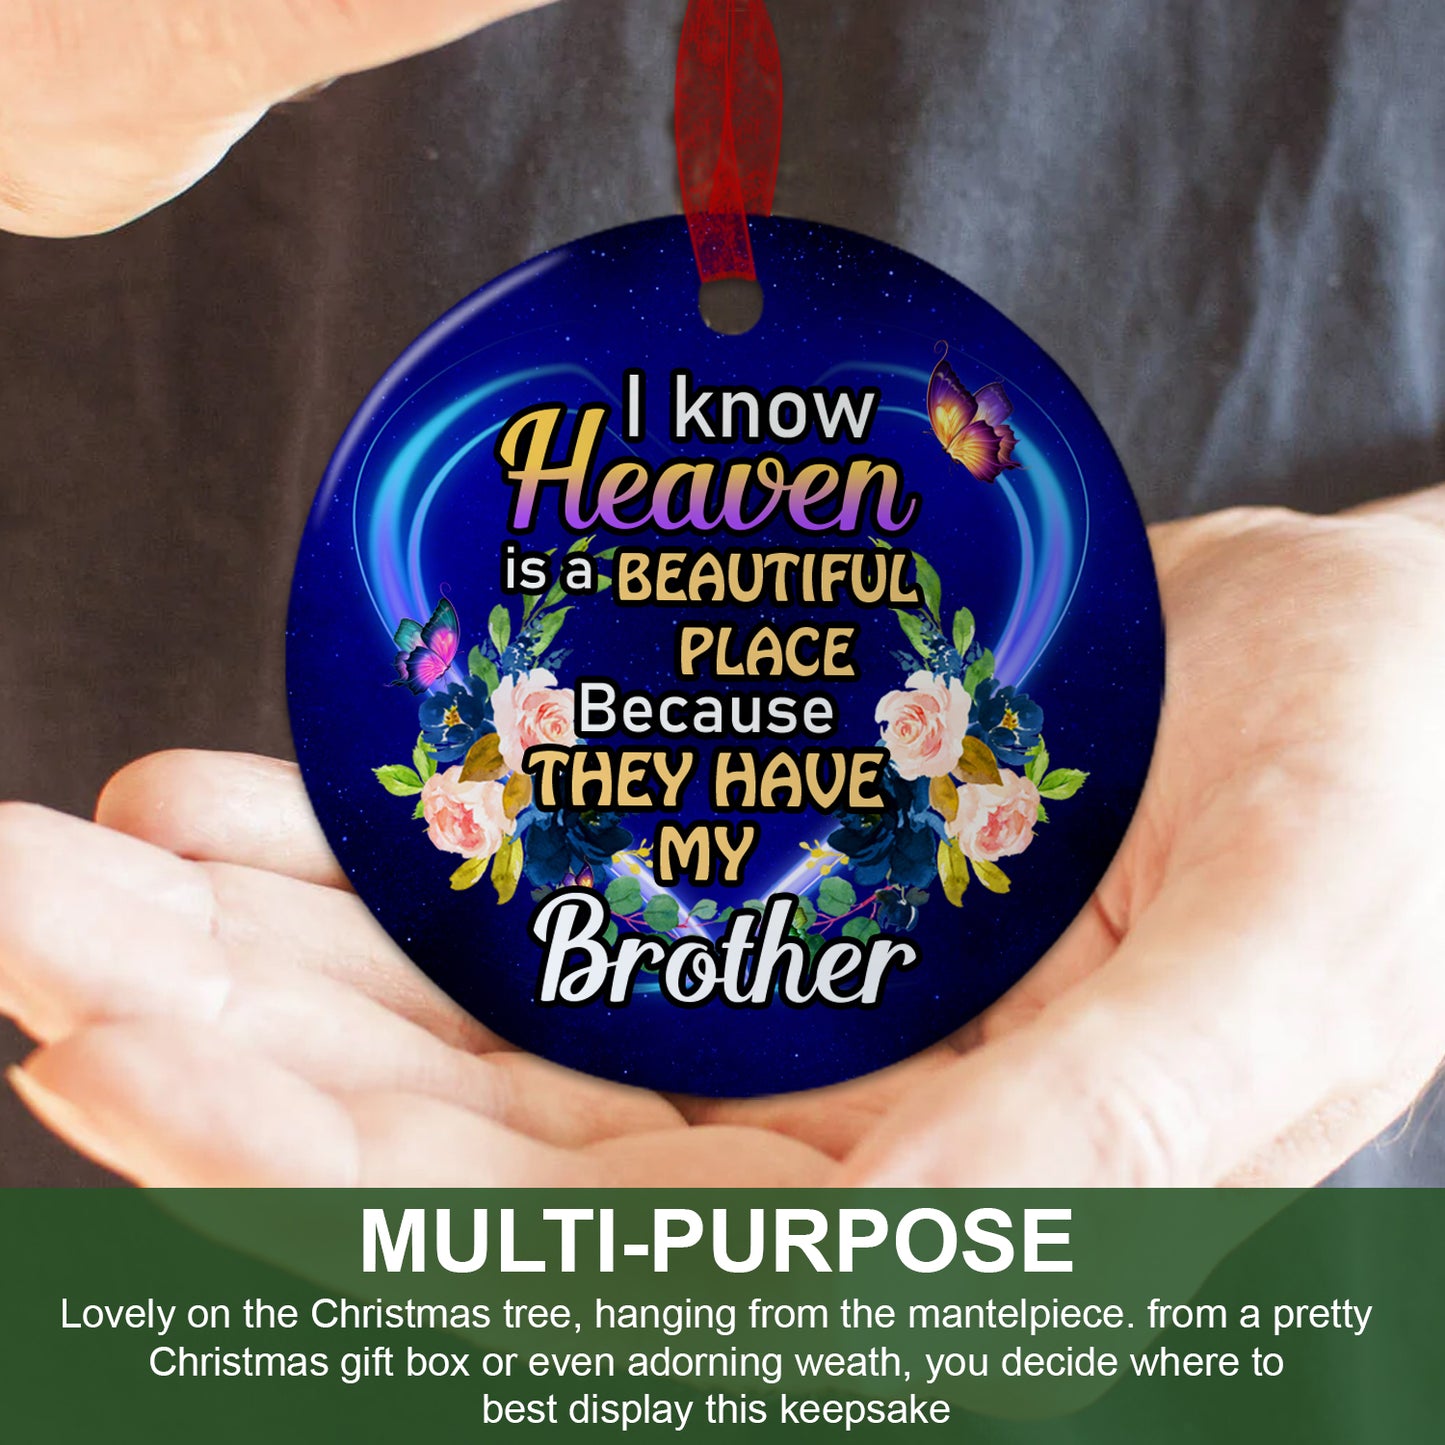 Brother Memorial Ornament I Know Heaven Is A Beautiful Place Because They Have My Brother Ornament Sympathy Keepsake Gift For Loss Of Brother- Aluminum Metal Ornament